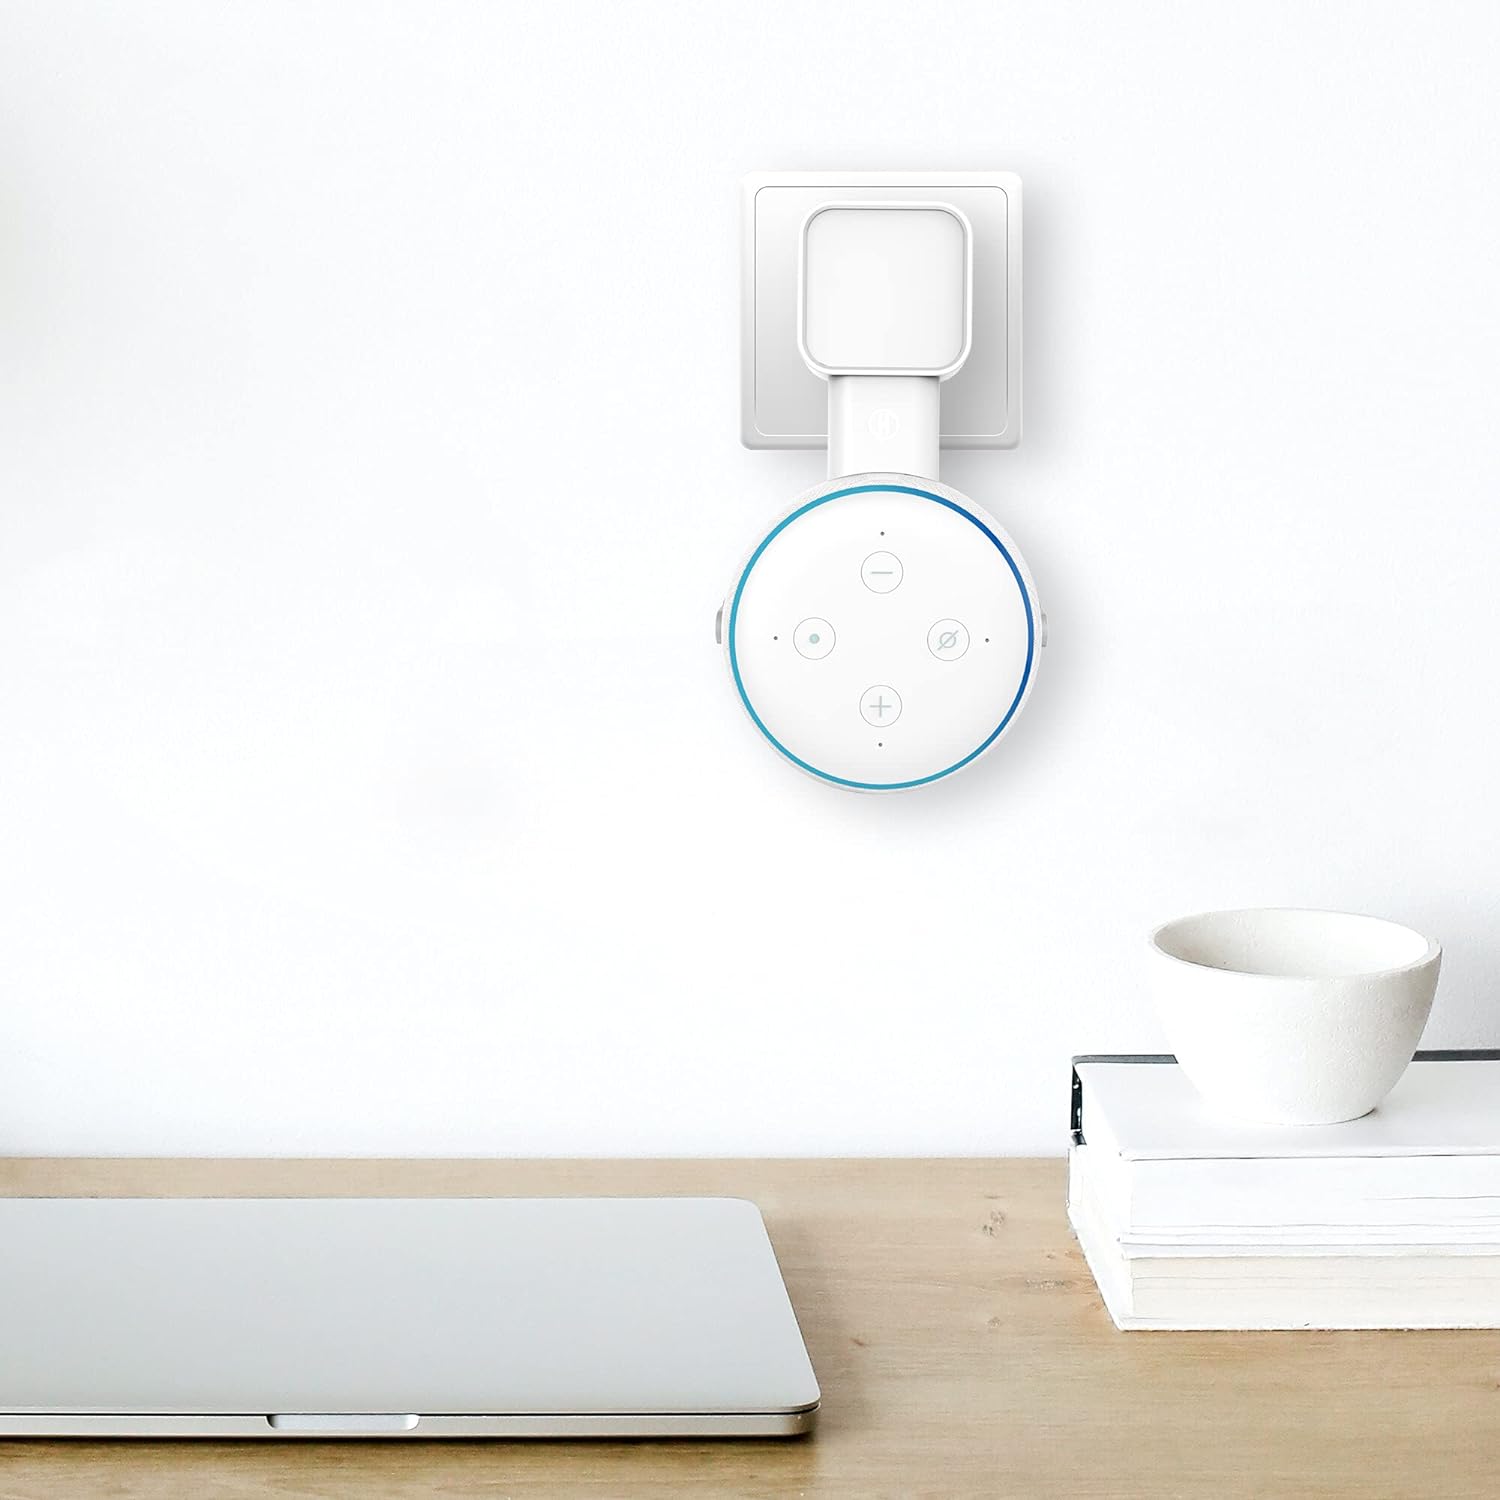 Revolutionize Your Smart Home Experience with the Heardear Outlet Wall Mount Holder for Echo Dot 3rd Generation